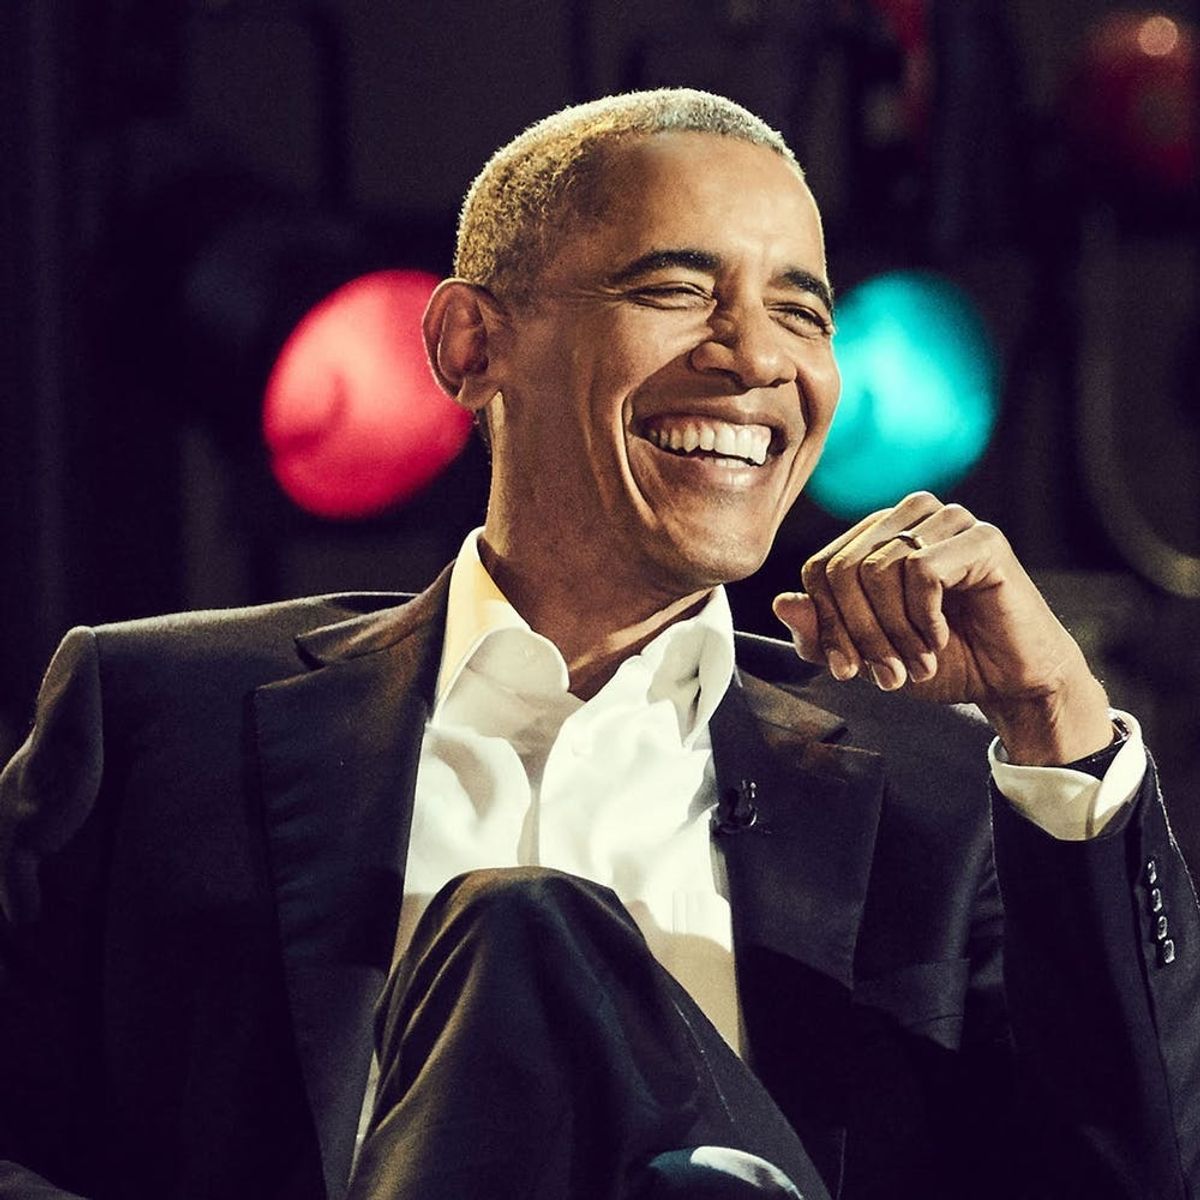 Barack Obama Explains the Key to His Dance Floor ‘Dad Moves’